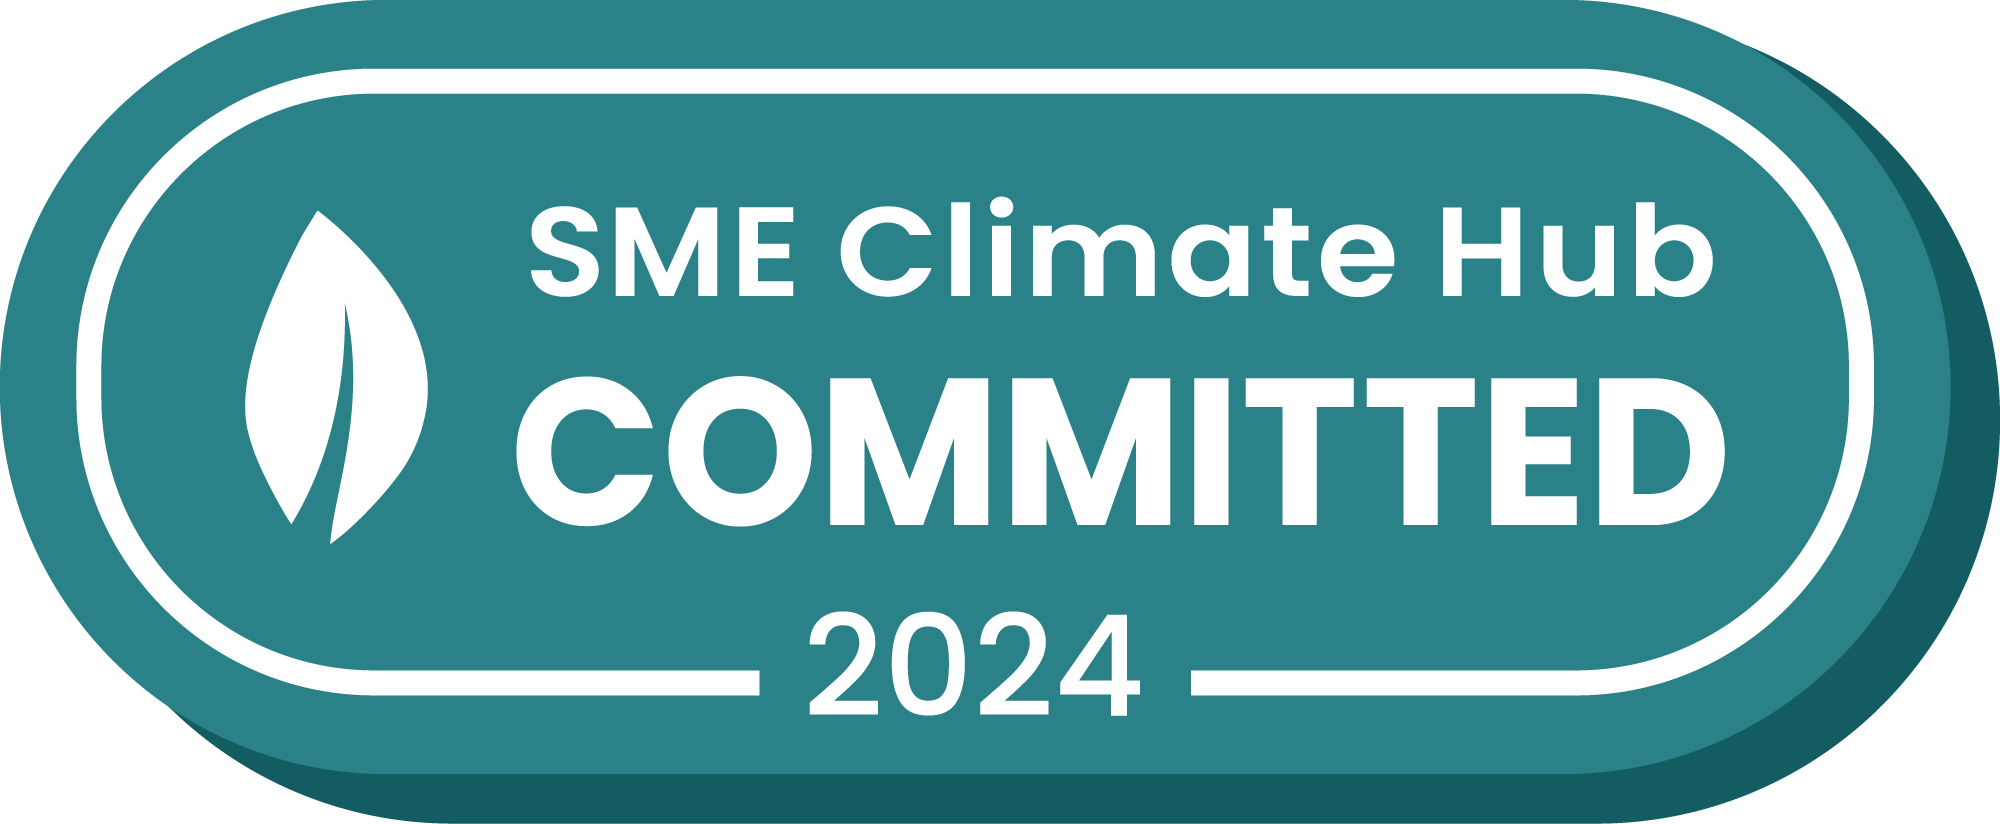 SME Committed Badge 2024